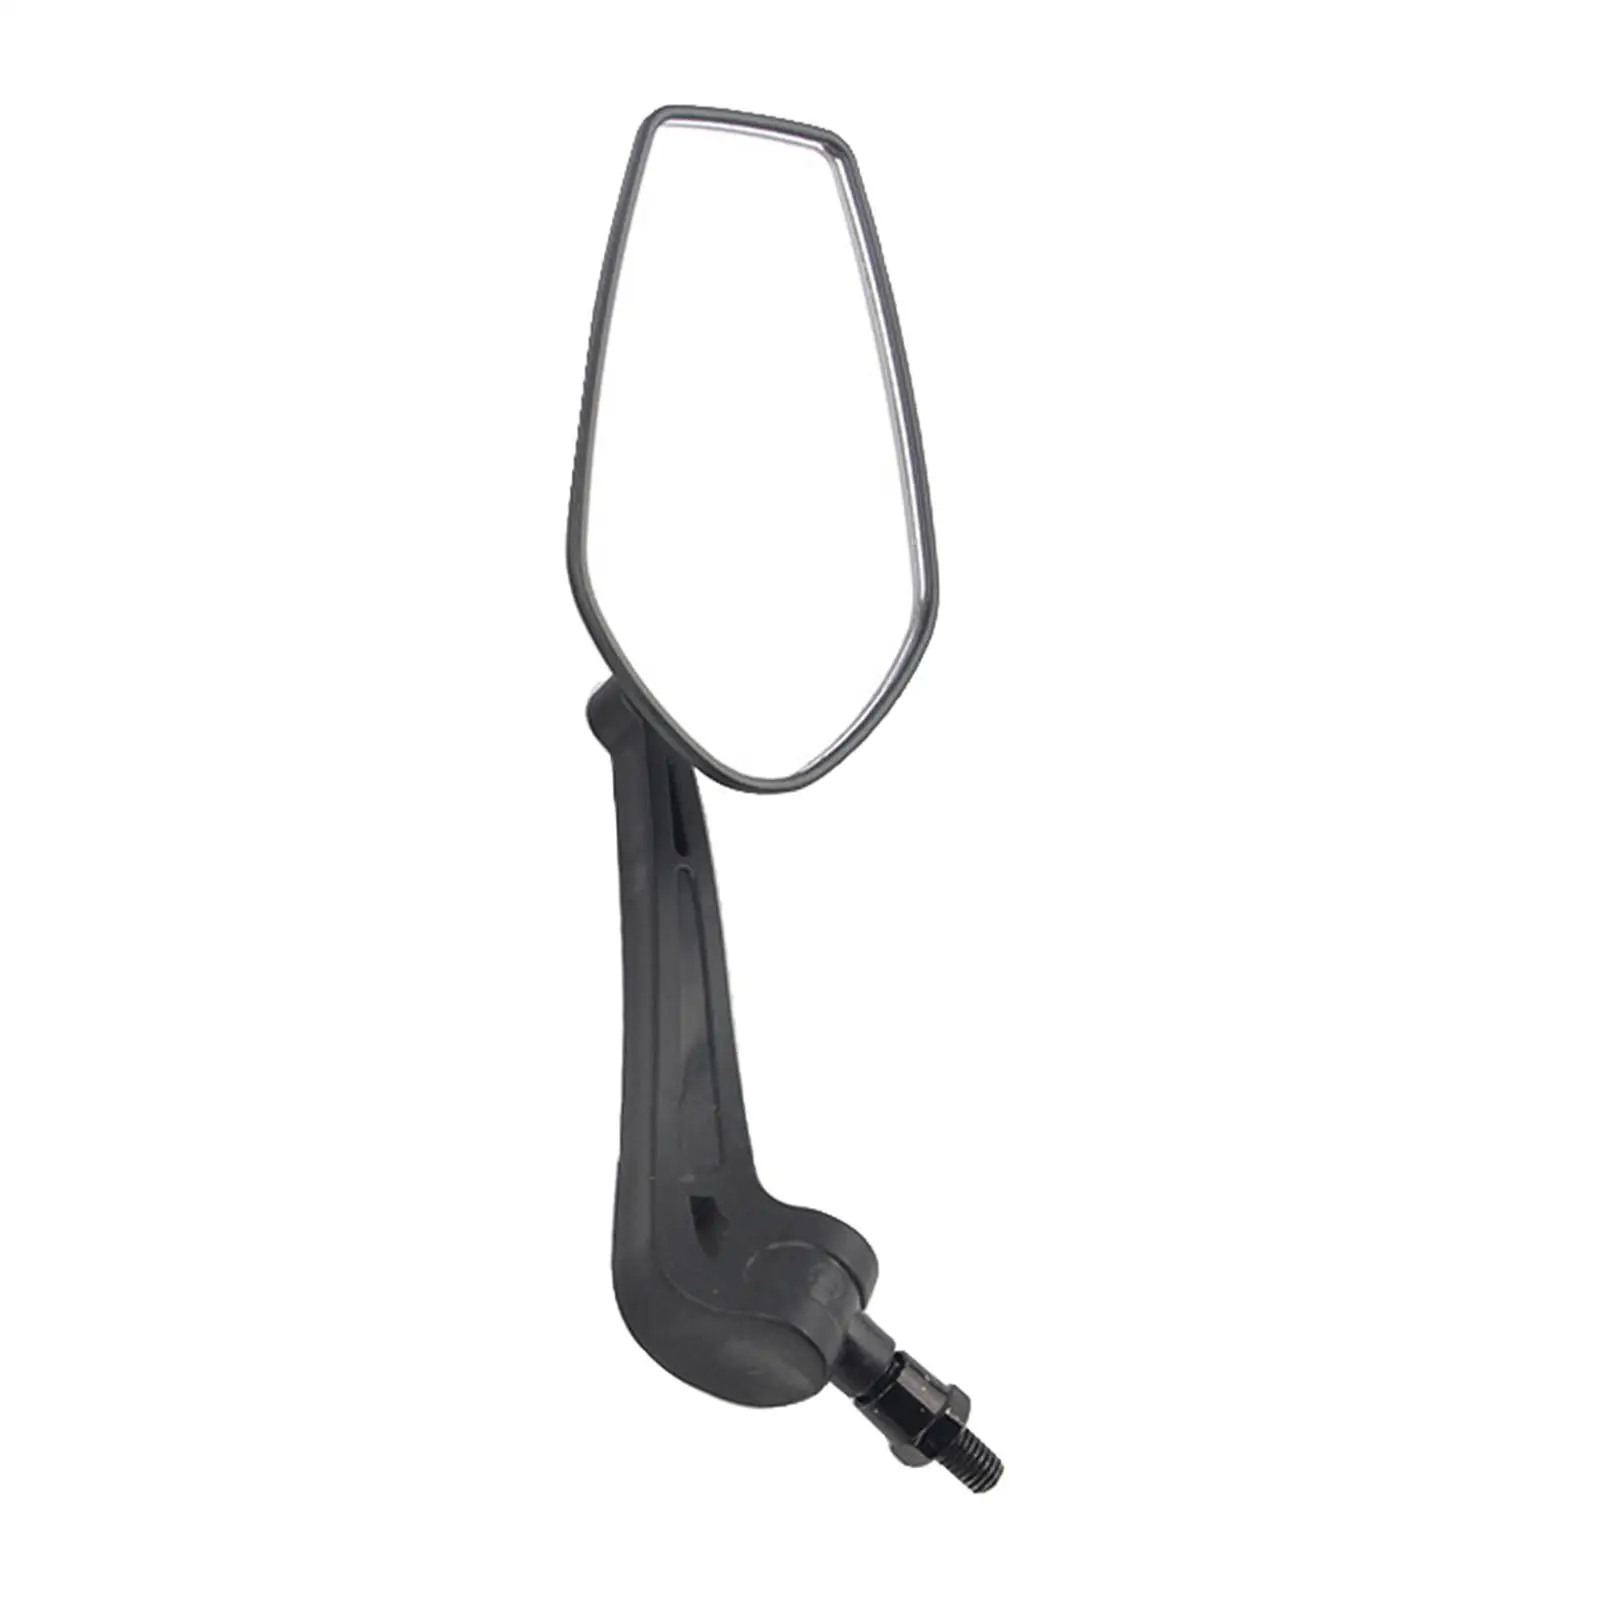 Road Bike Mirror Rotatable Detachable Convex Universal Riding Safety Spare Bike Rear View Mirrors for Bike Modification